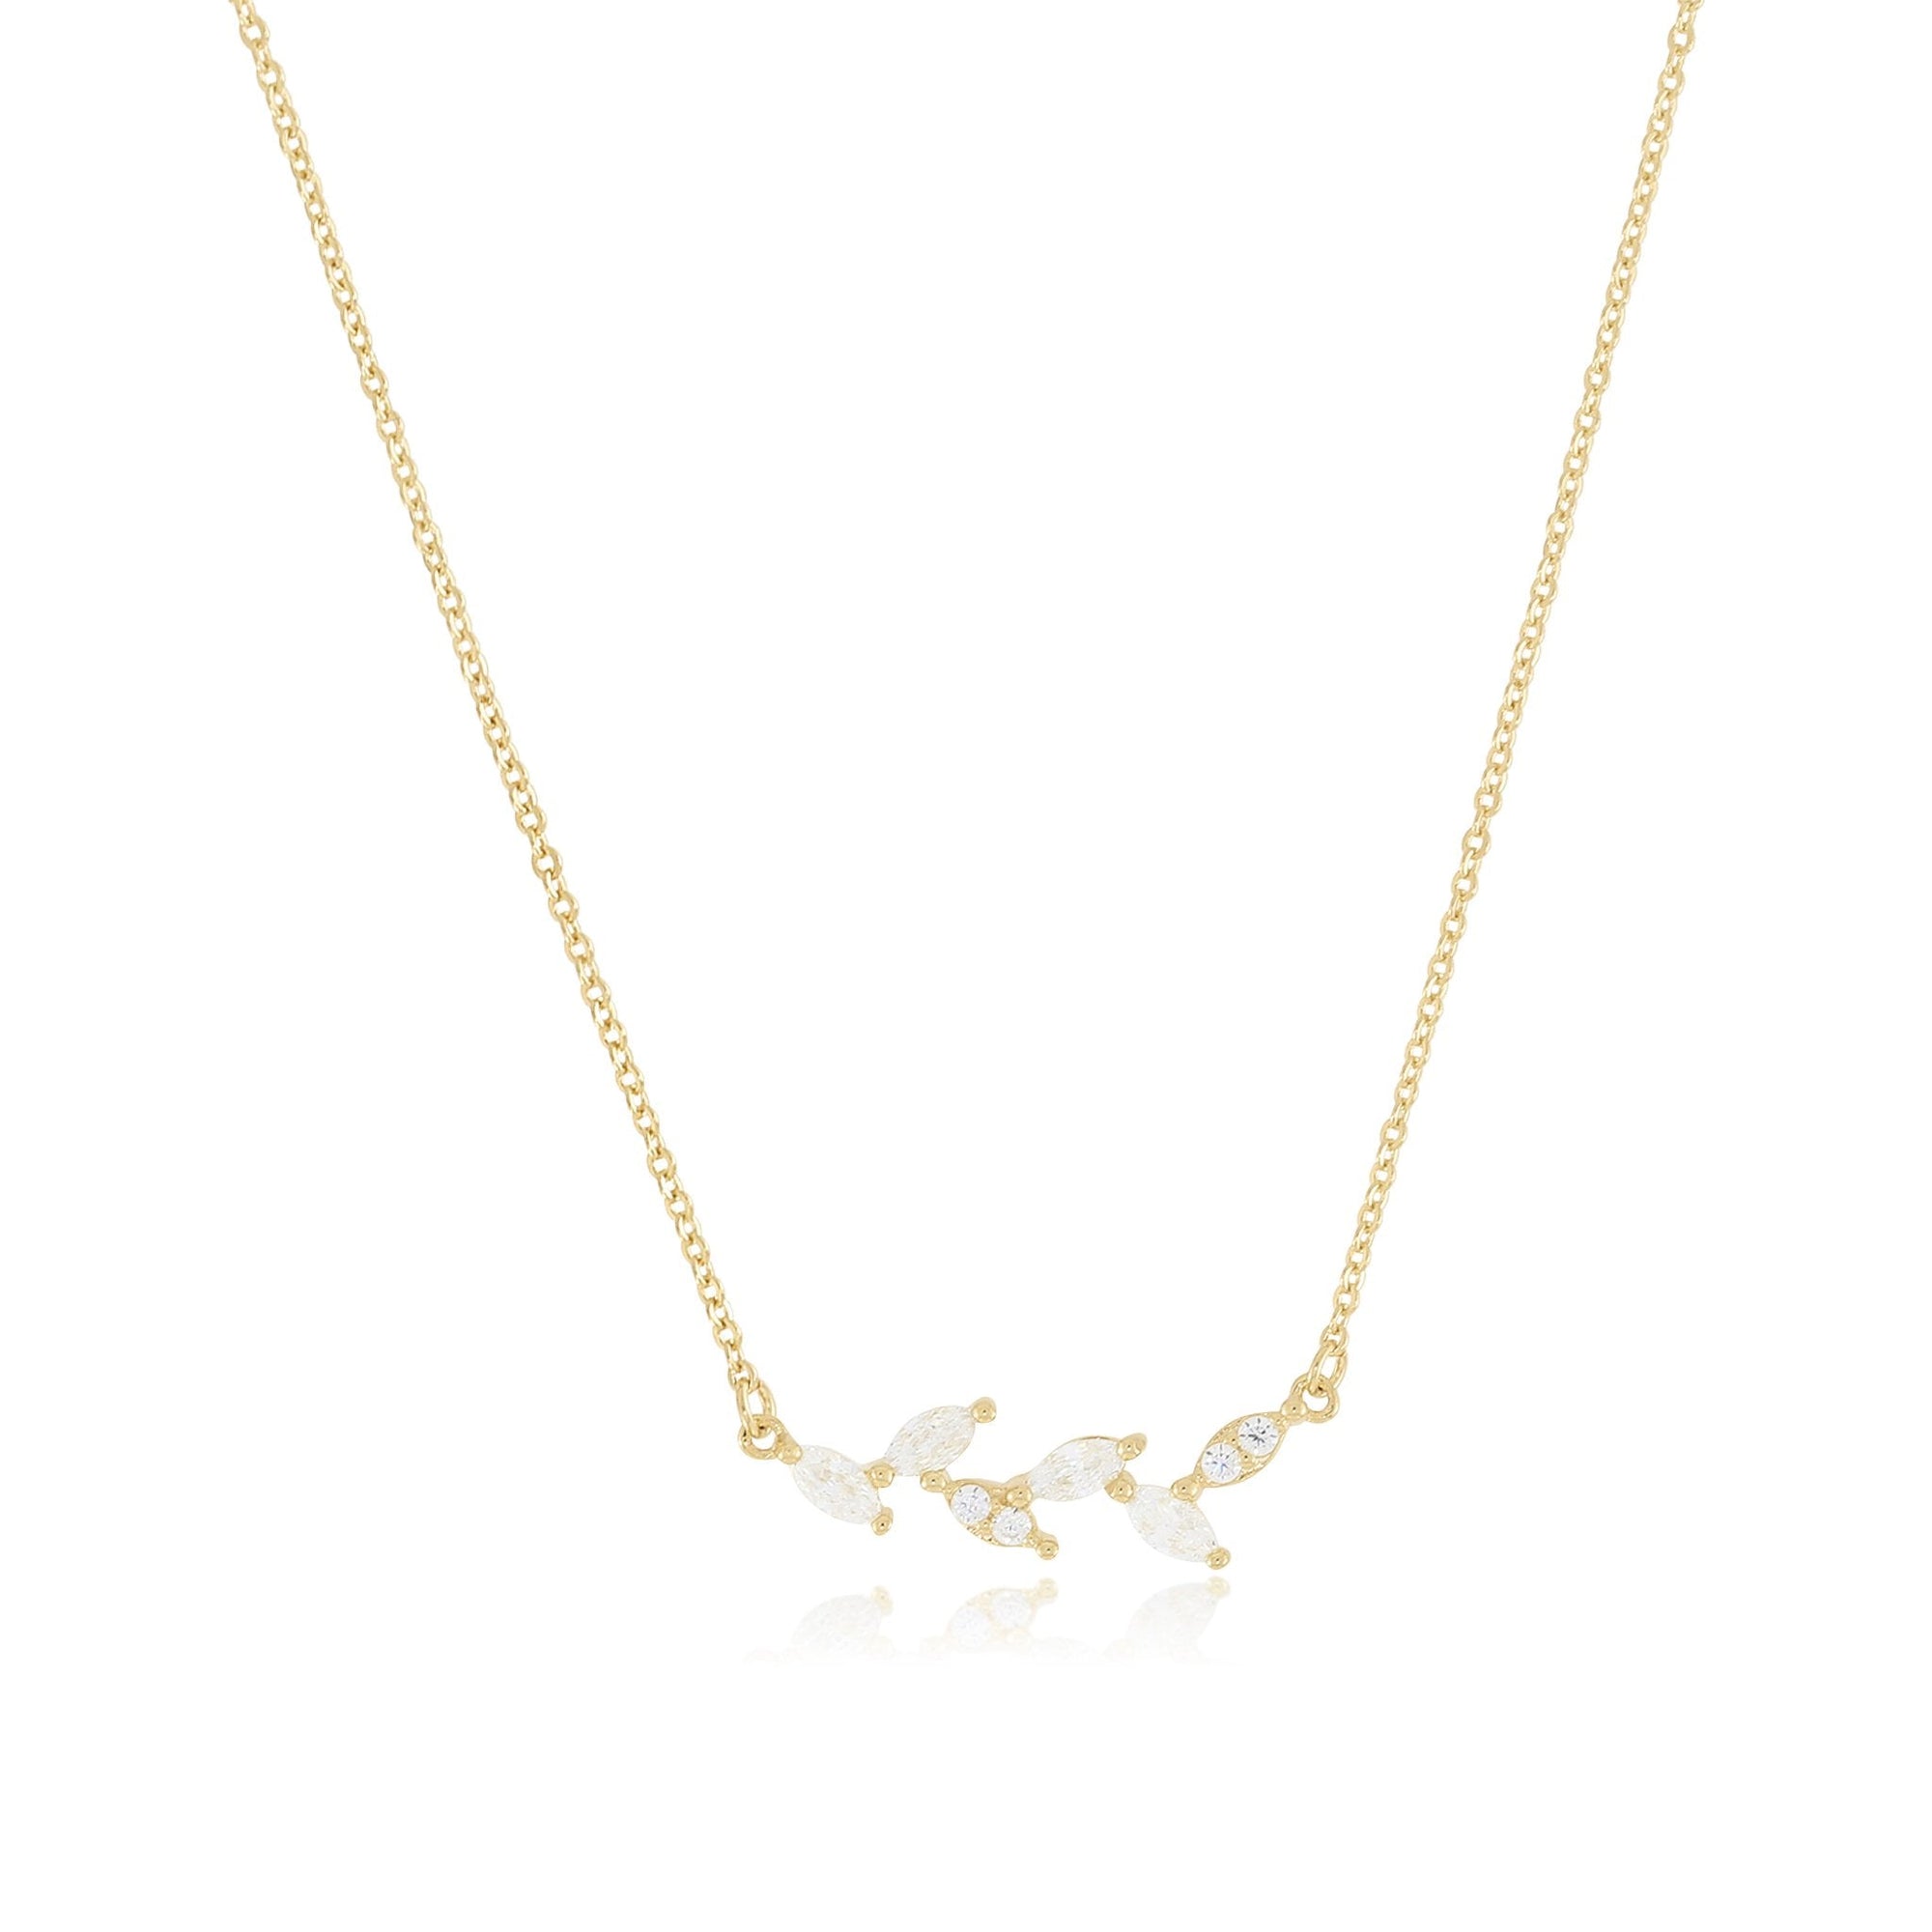 IVY NECKLACE - Trove & Co.